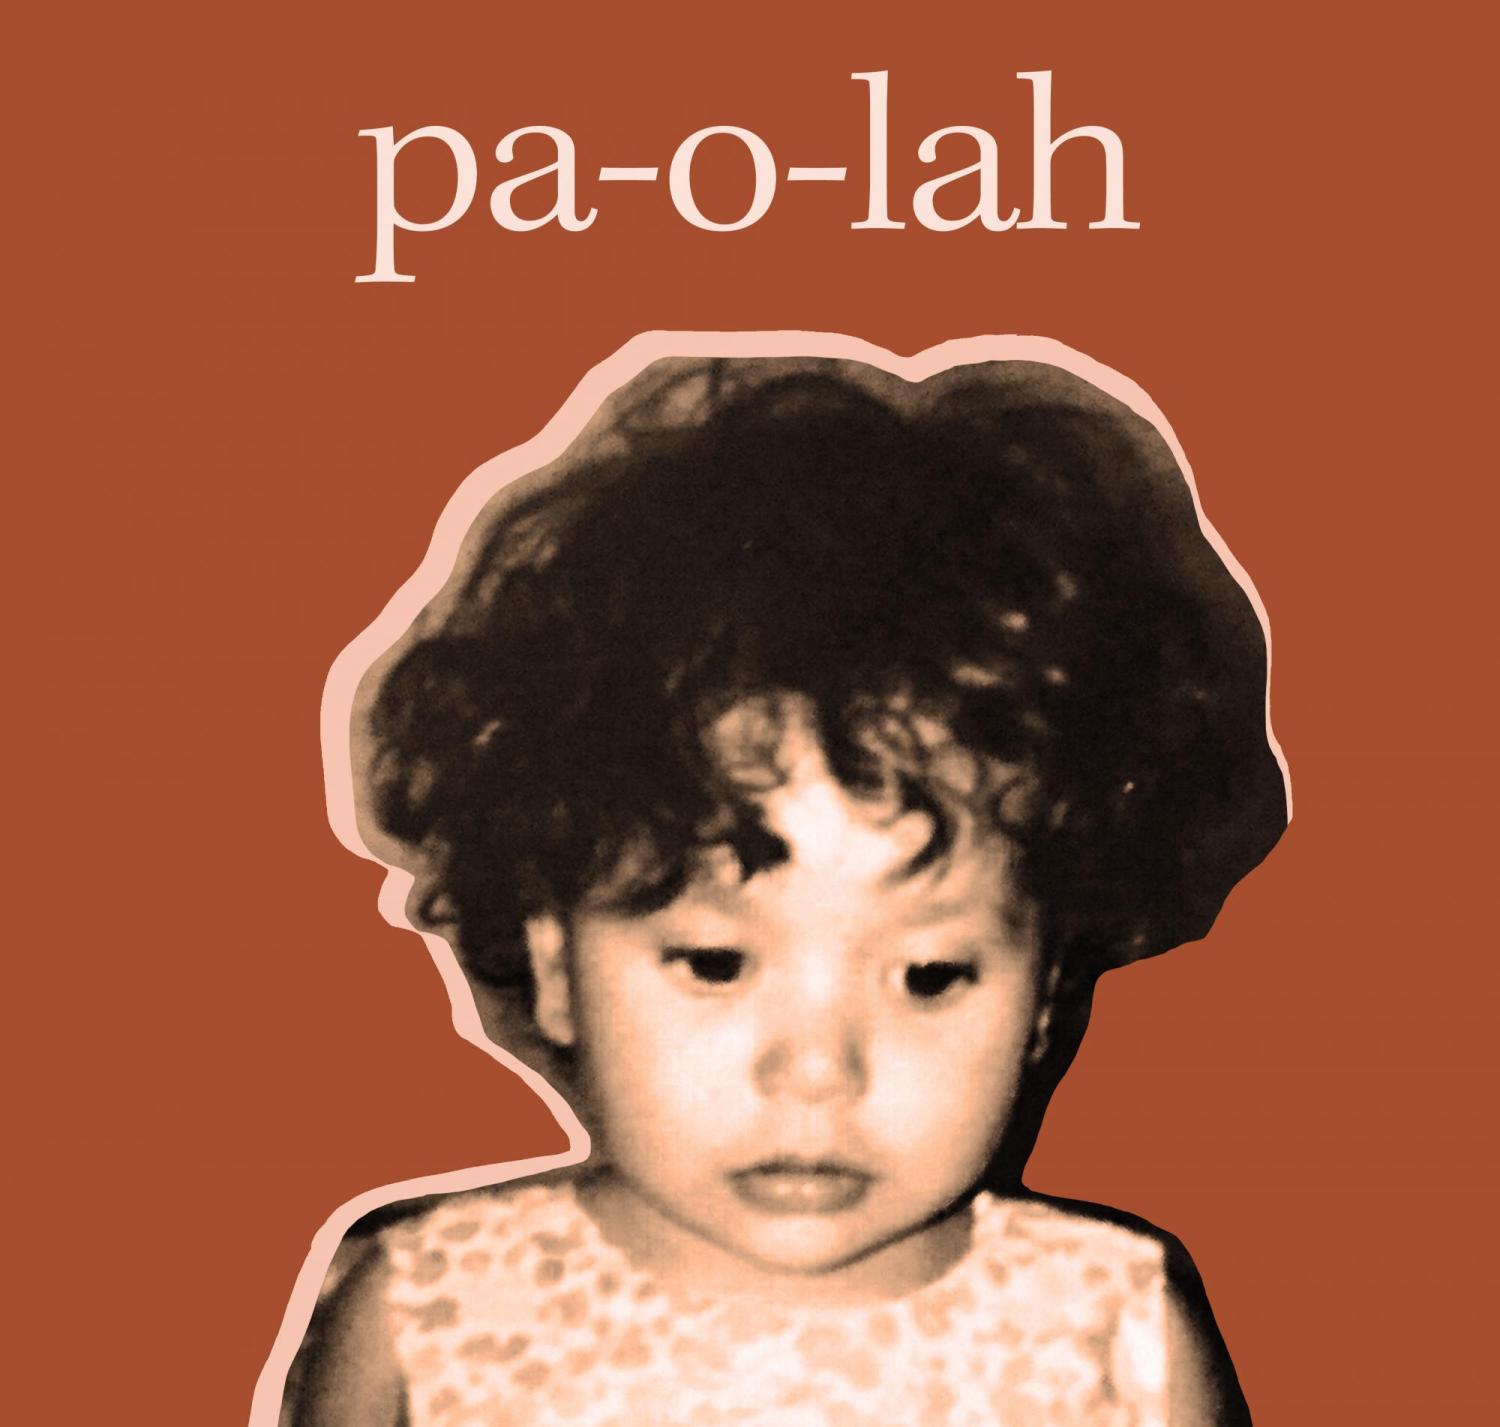 Movie poster with cut-out photo of artist as toddler pasted against a brunt orange background with title pa-o-lah